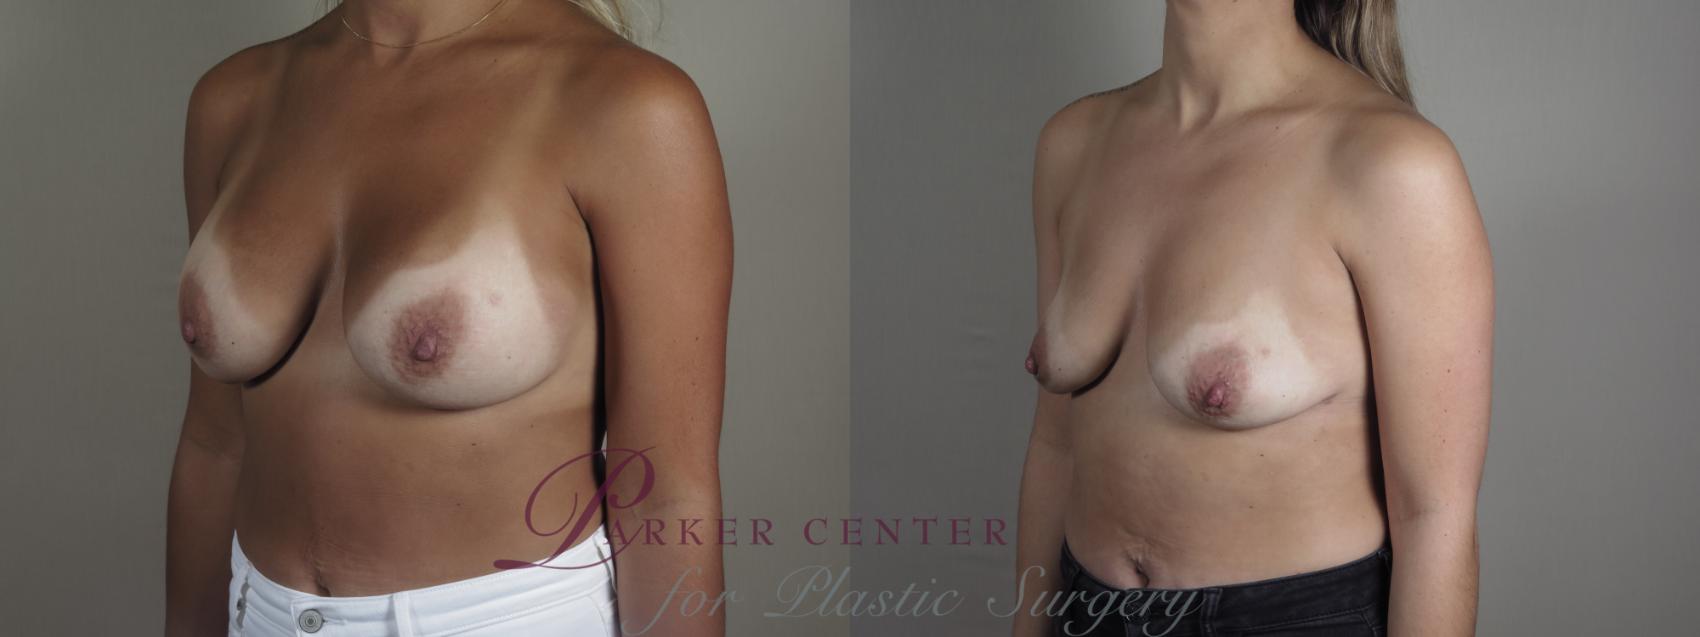 Breast Implant Removal Case 1197 Before & After View #2 | Paramus, NJ | Parker Center for Plastic Surgery